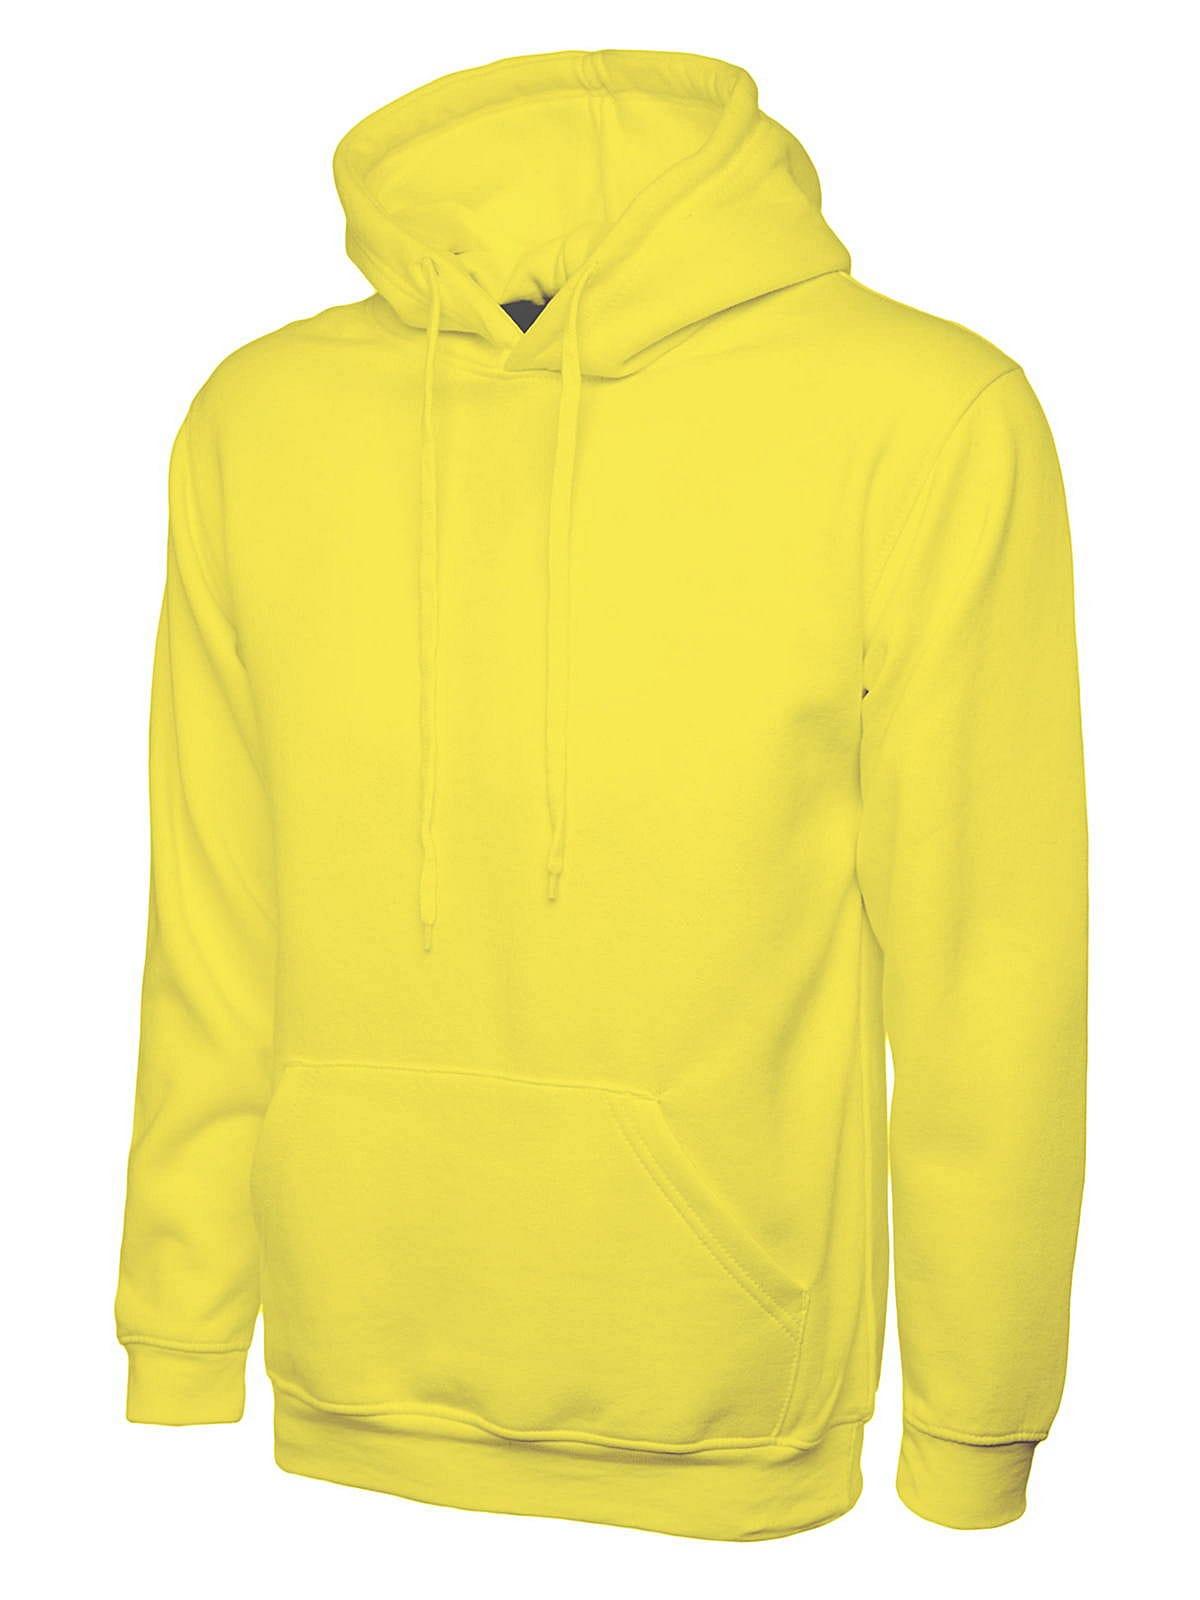 Uneek 300GSM Classic Hoodie in Yellow (Product Code: UC502)